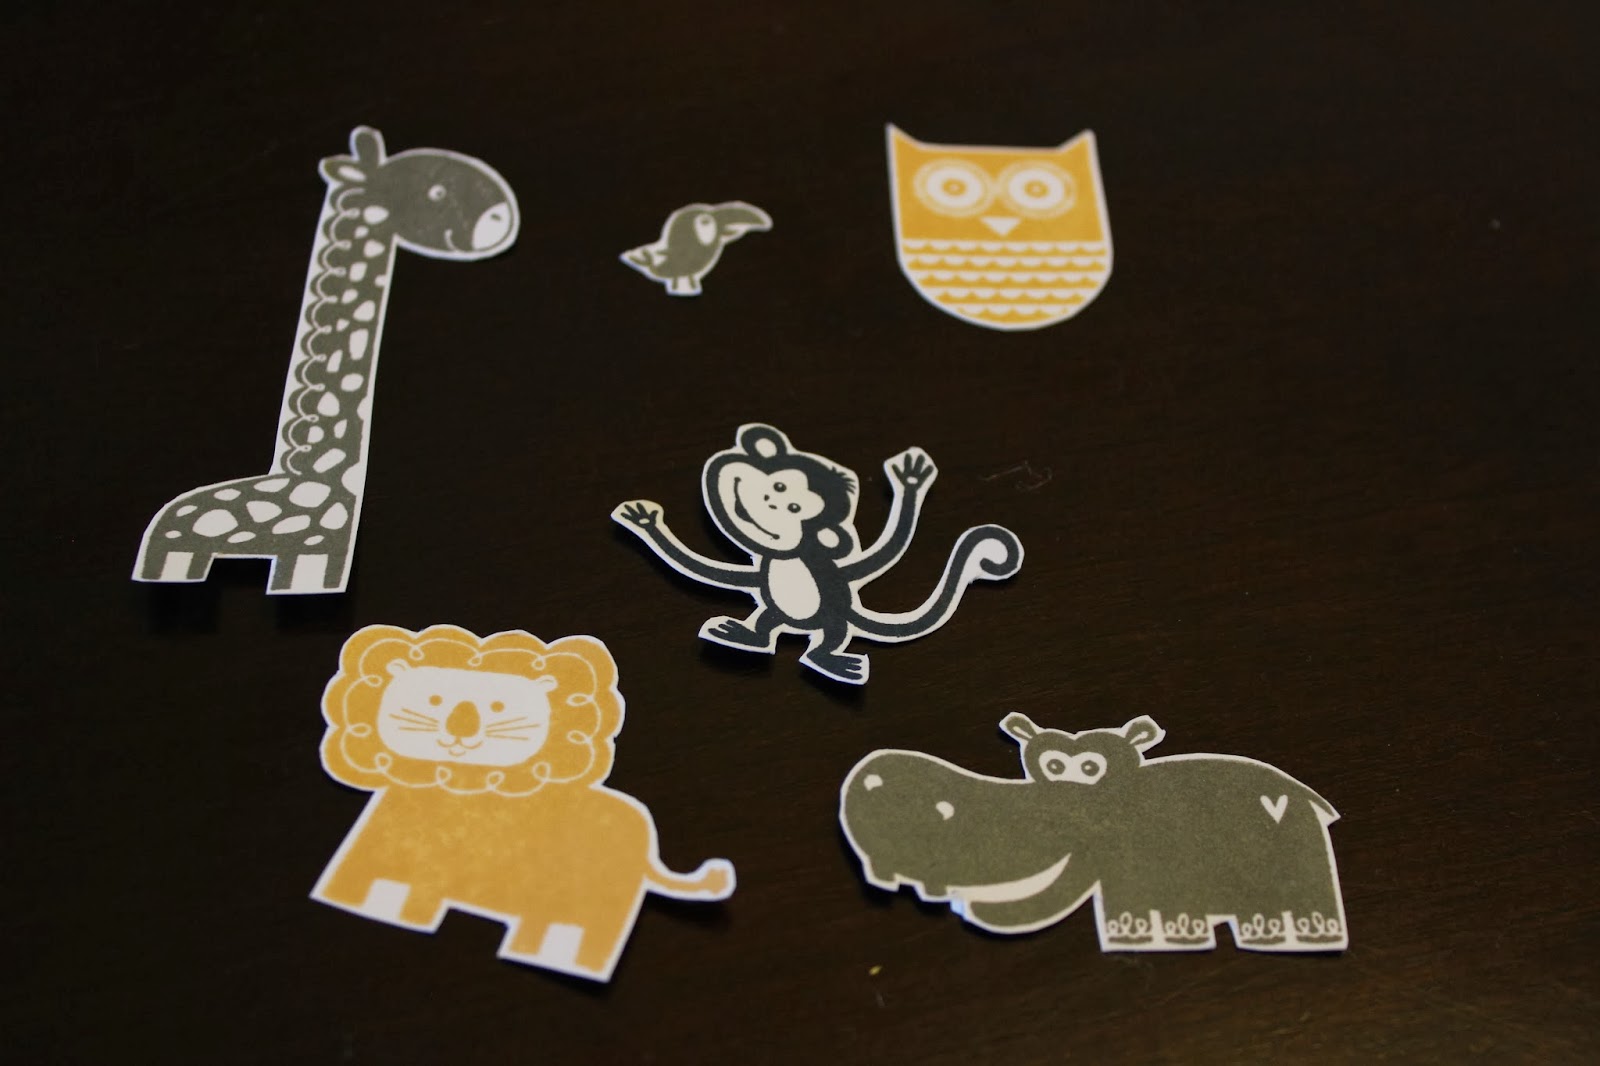 giraffe, tucan bird, owl, monkey, lion and hippo stamped shapes cut out of cardstock